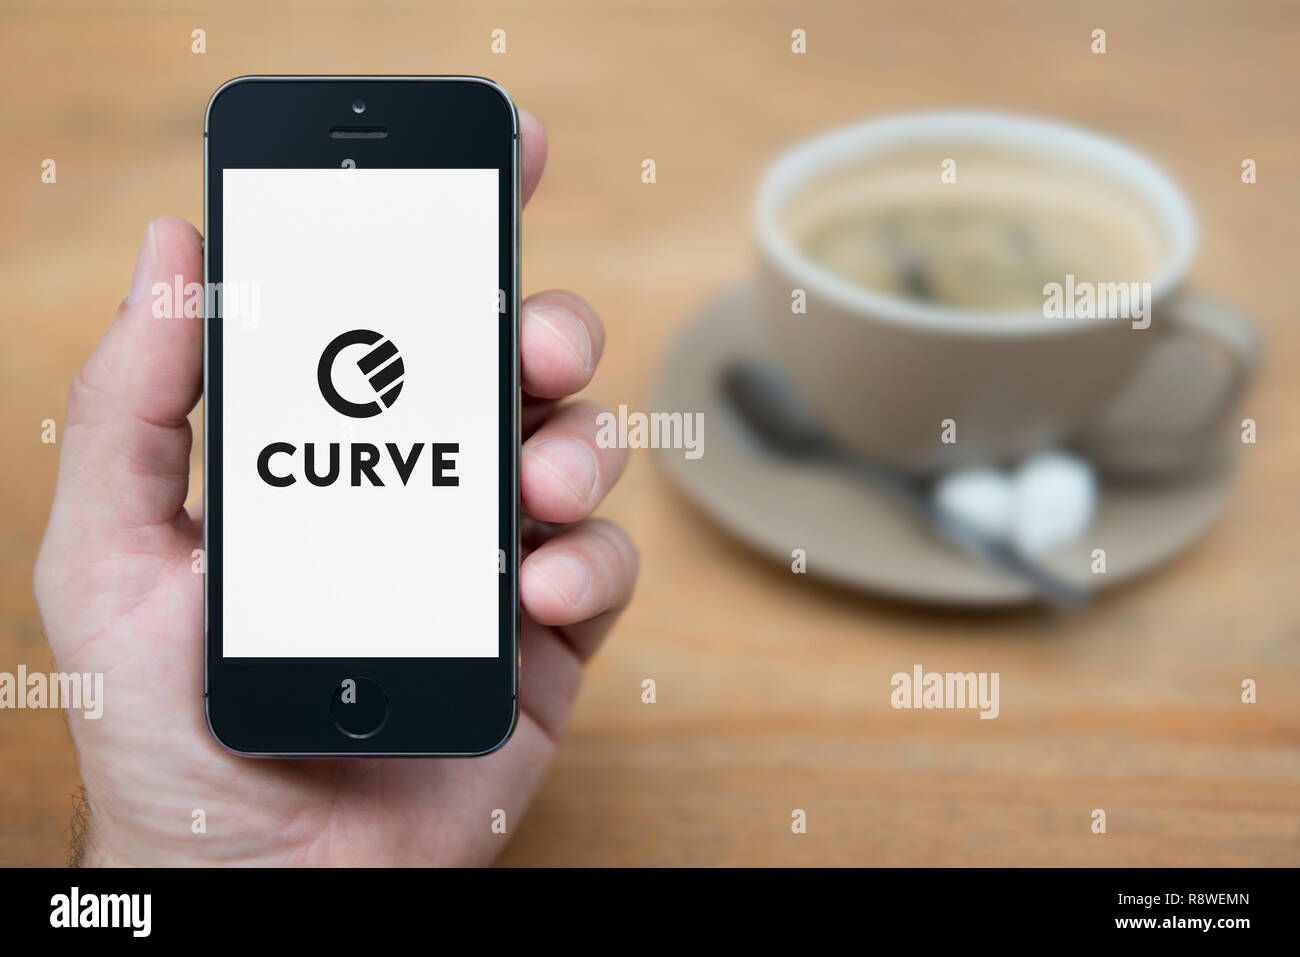 A man looks at his iPhone which displays the Curve logo (Editorial use only). Stock Photo